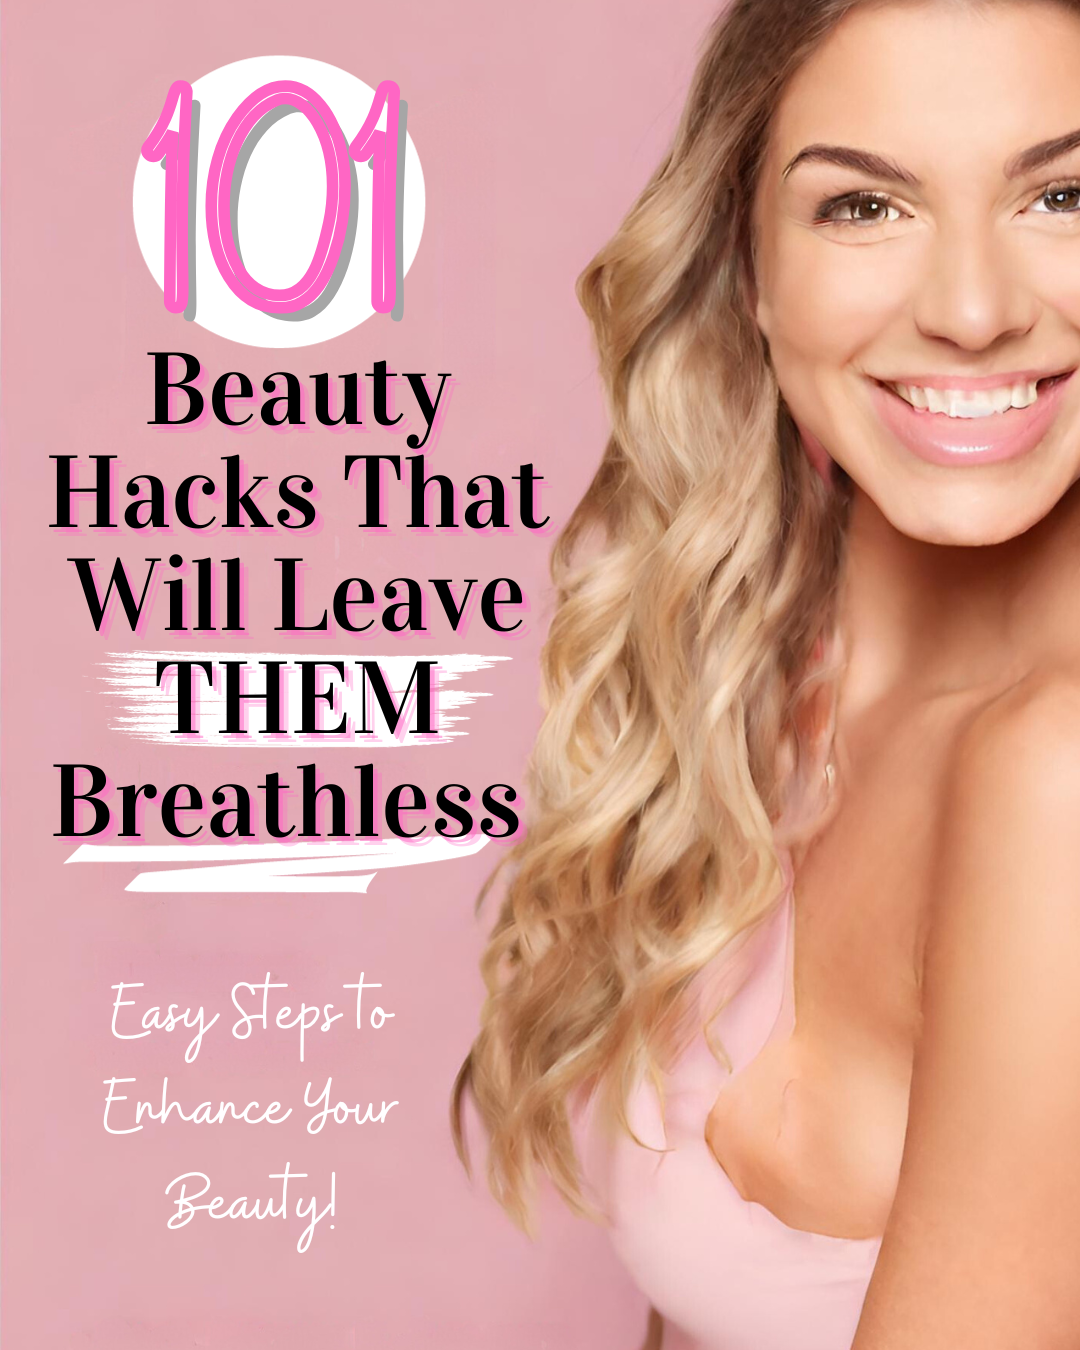 101 Beauty Hacks That Will Leave THEM Breathless!